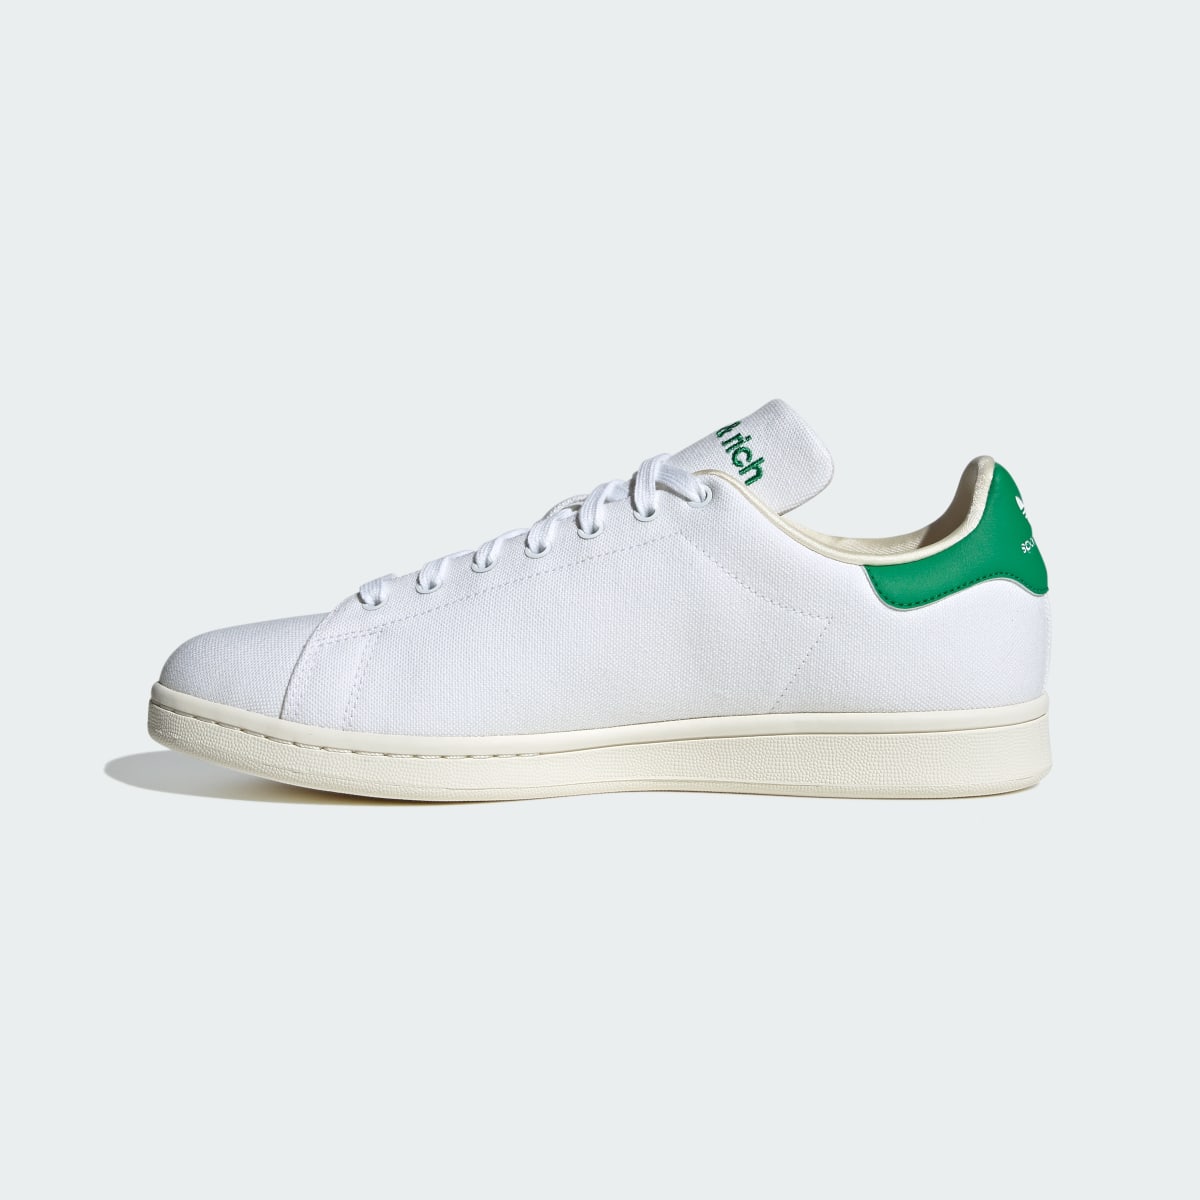 Adidas Chaussure Stan Smith Sporty & Rich. 8